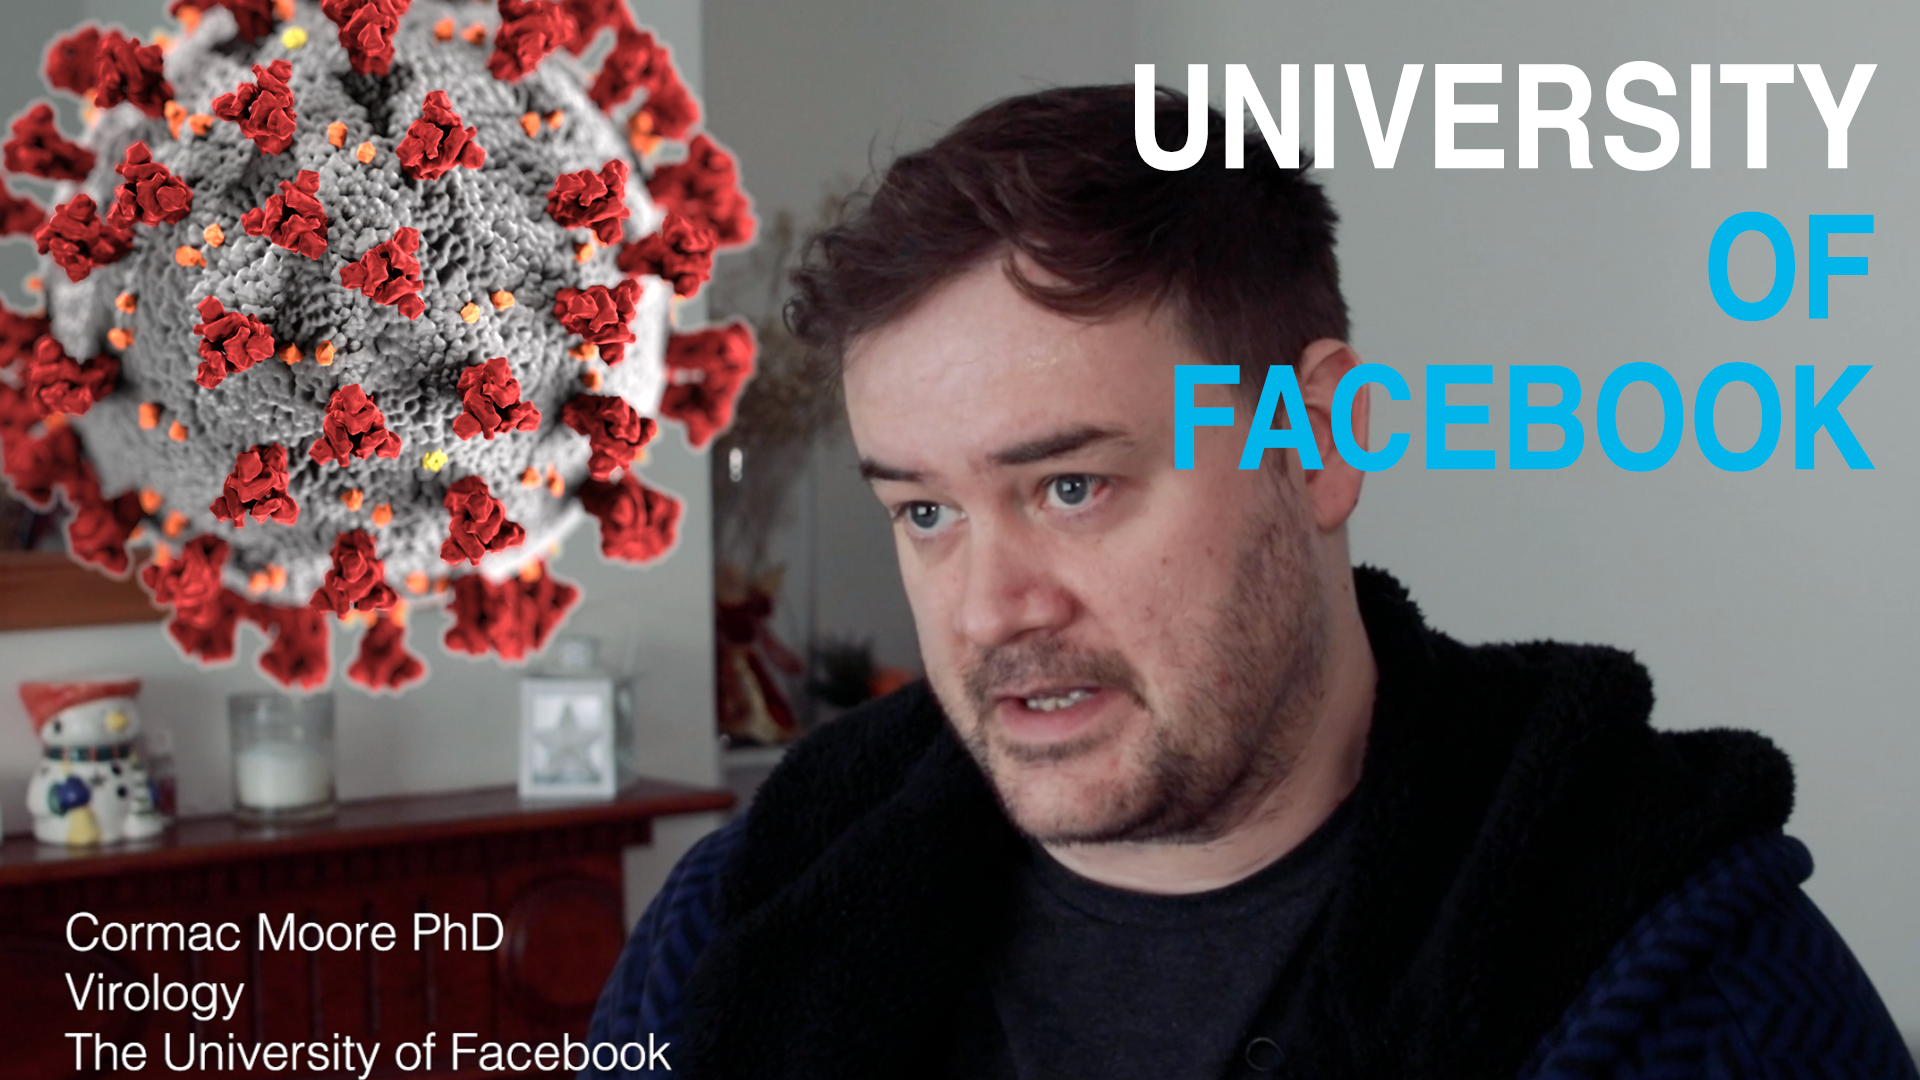 The University of Facebook